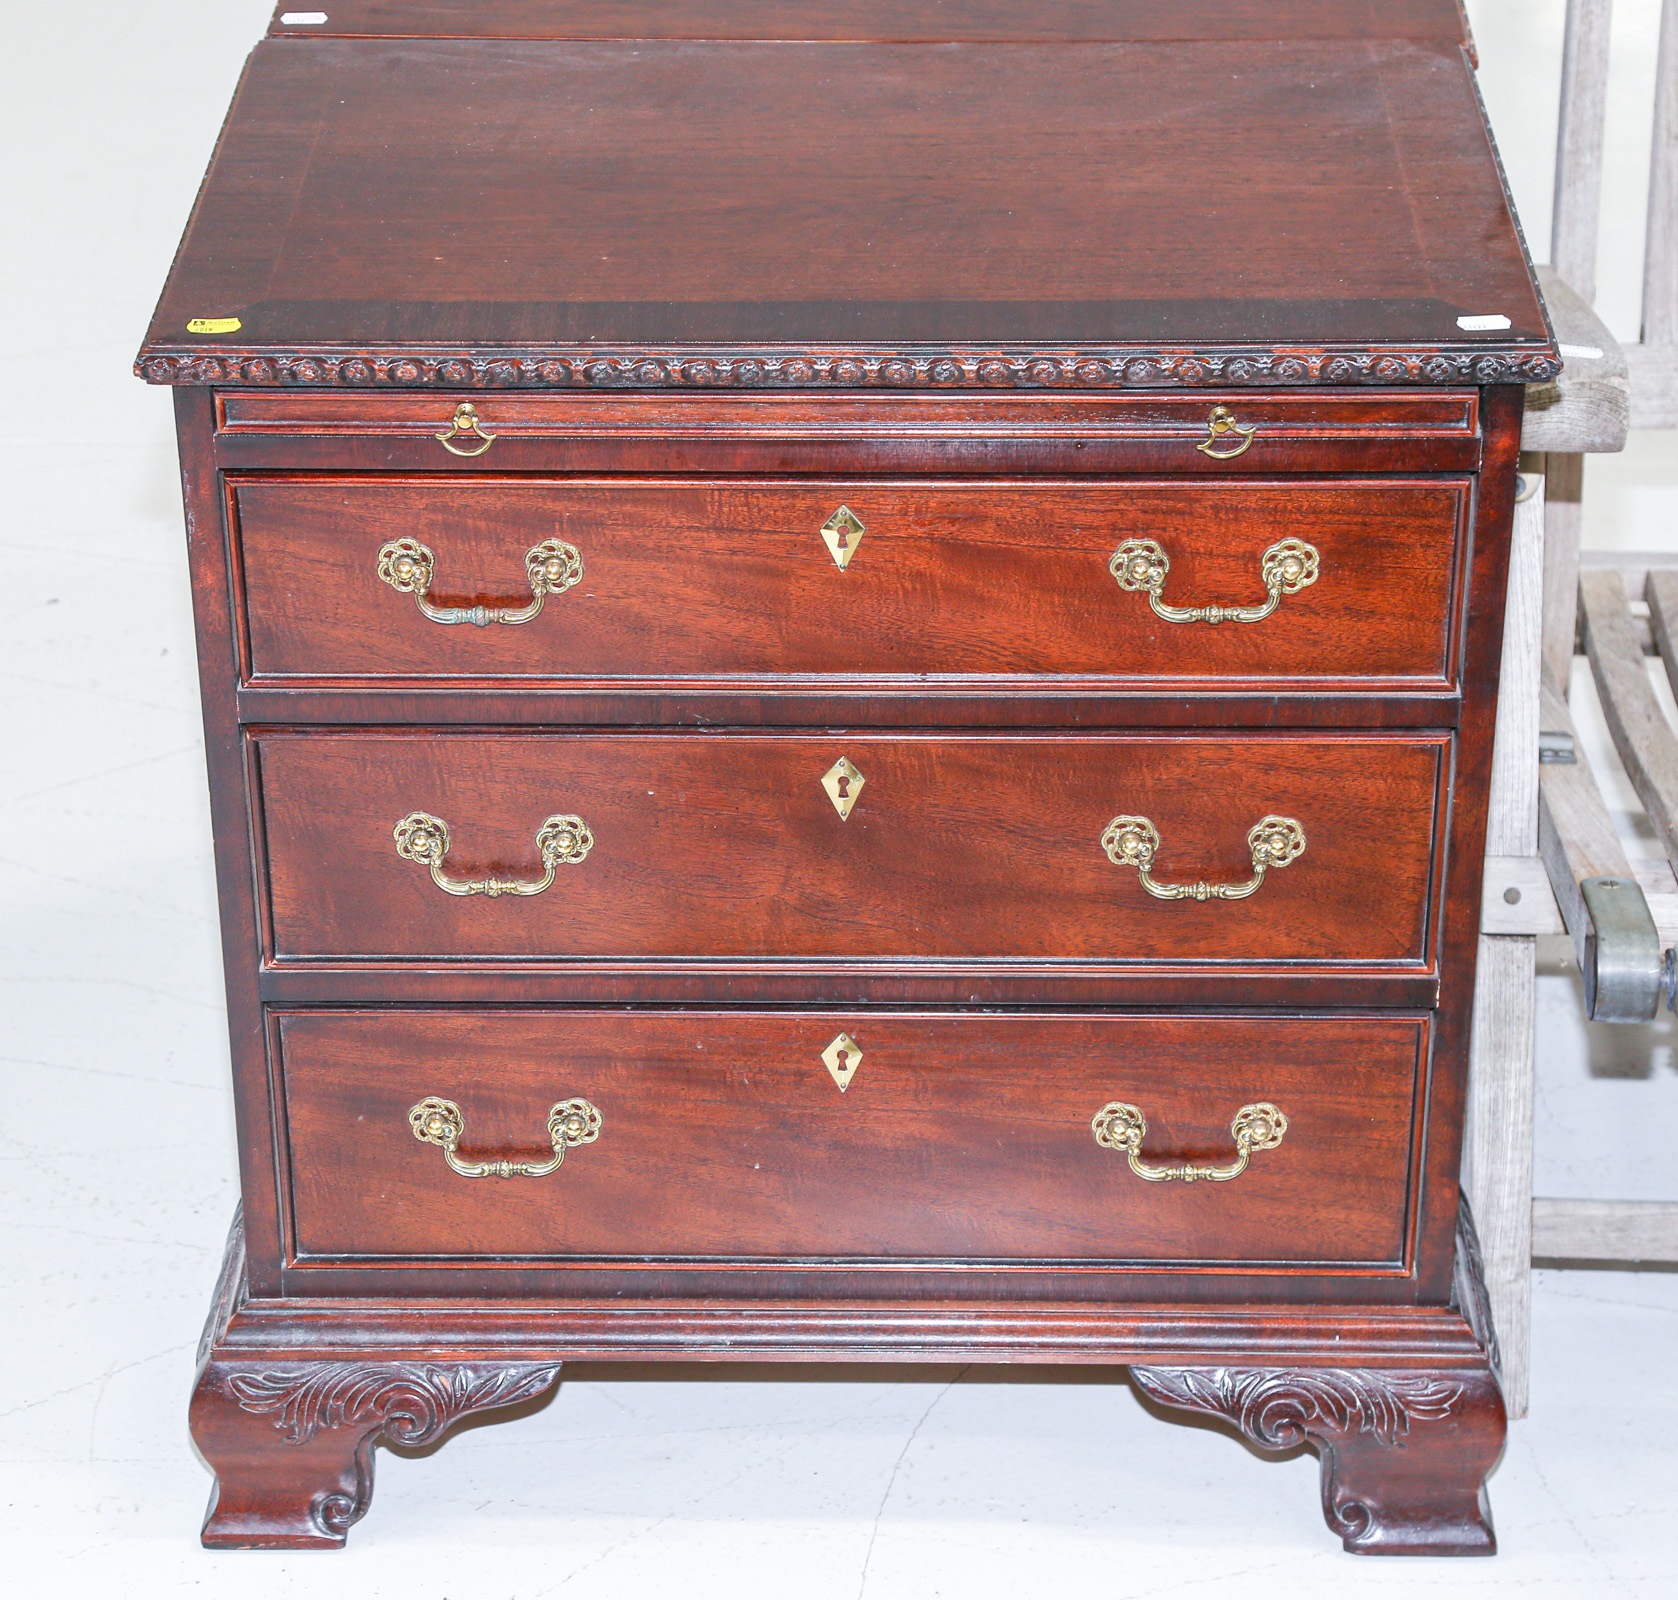 CHIPPENDALE STYLE MAHOGANY BACHELOR S 369b82